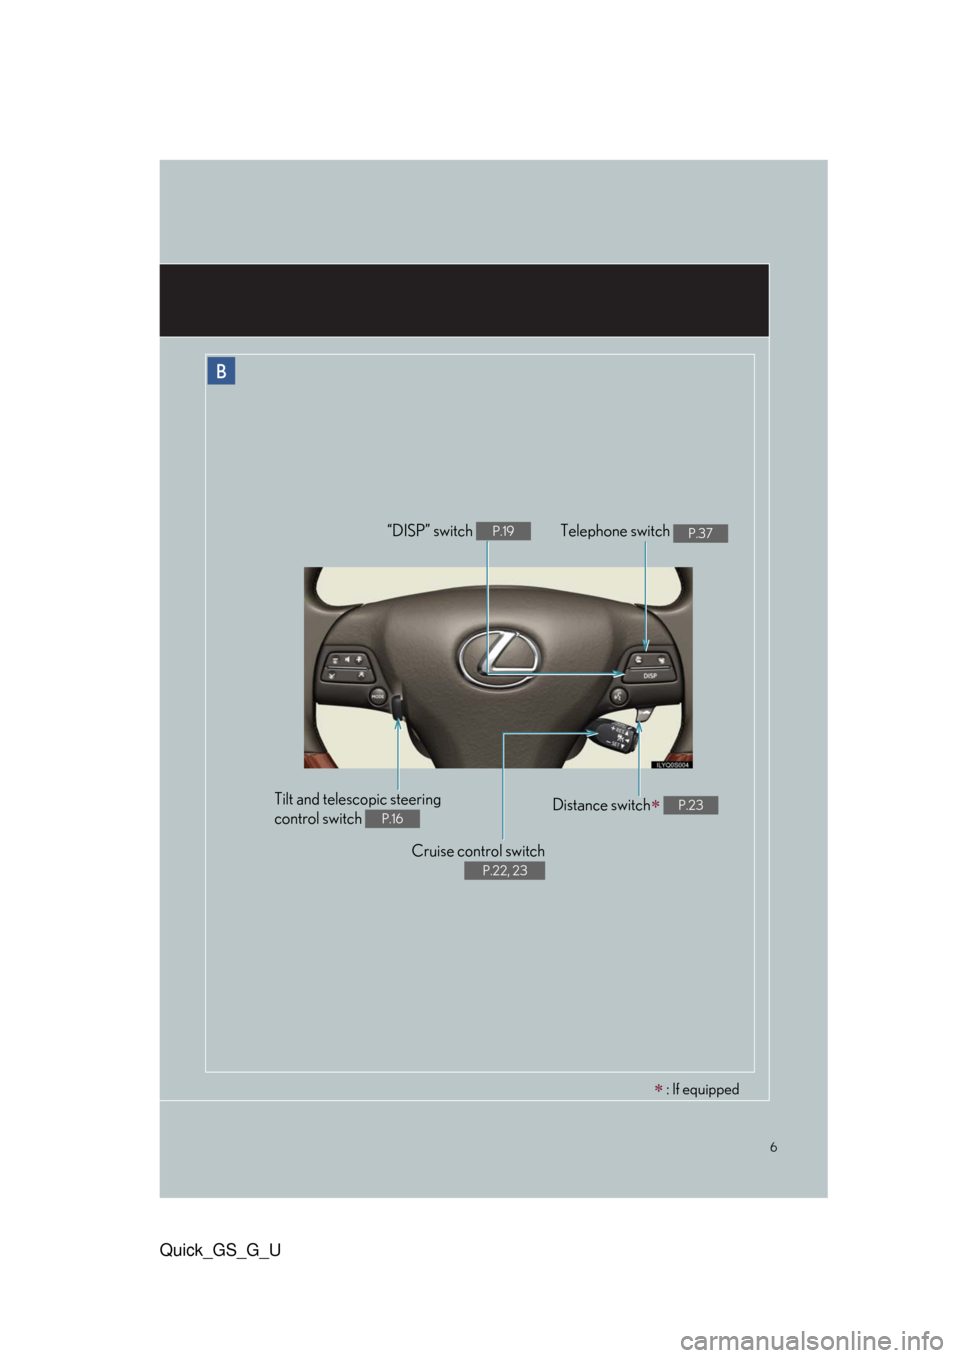 Lexus GS350 2010  Specifications / LEXUS 2010 GS460/350 QUICK GUIDE OWNERS MANUAL (OM30B76U) 6
Quick_GS_G_U
B
Cruise control switch
 
P.22, 23
Telephone switch P.37“DISP” switch P.19
Distance switch P.23Tilt and telescopic steering 
control switch 
P.16
 : If equipped 